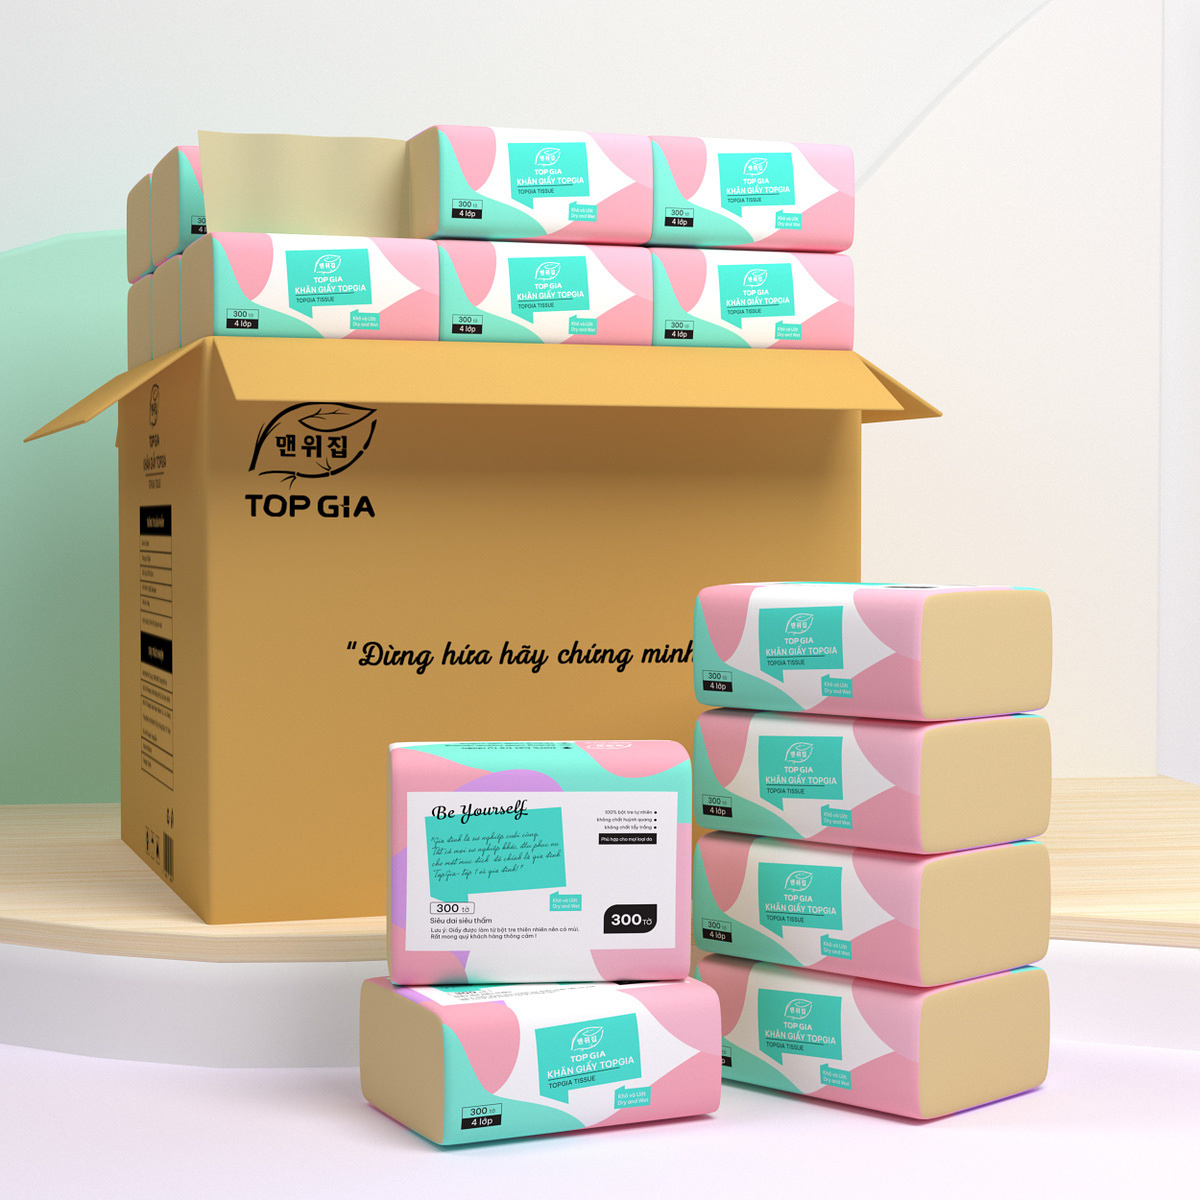 tissue Tissue Box tissue paper tissue packaging Packaging product design  khăn giấy wipes wipes packaging Wipes Design